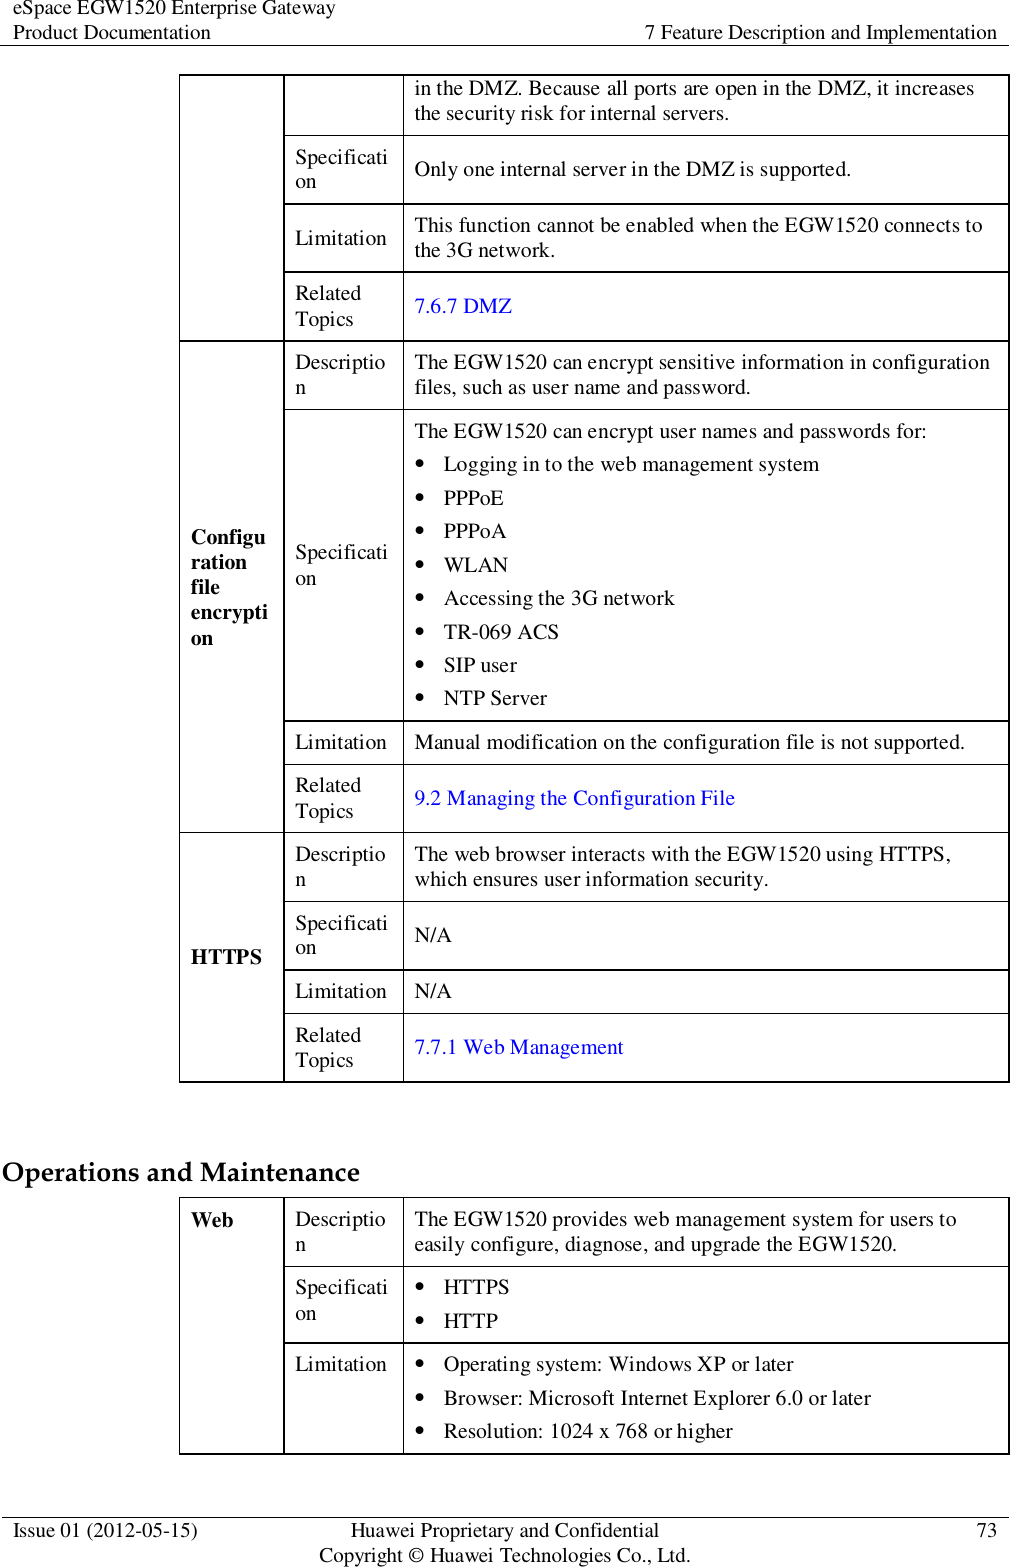 eSpace EGW1520 Enterprise Gateway Product Documentation 7 Feature Description and Implementation  Issue 01 (2012-05-15) Huawei Proprietary and Confidential                                     Copyright © Huawei Technologies Co., Ltd. 73  in the DMZ. Because all ports are open in the DMZ, it increases the security risk for internal servers. Specification Only one internal server in the DMZ is supported. Limitation This function cannot be enabled when the EGW1520 connects to the 3G network. Related Topics 7.6.7 DMZ Configuration file encryption Description The EGW1520 can encrypt sensitive information in configuration files, such as user name and password. Specification The EGW1520 can encrypt user names and passwords for:  Logging in to the web management system  PPPoE  PPPoA  WLAN  Accessing the 3G network  TR-069 ACS  SIP user  NTP Server Limitation Manual modification on the configuration file is not supported. Related Topics 9.2 Managing the Configuration File HTTPS Description The web browser interacts with the EGW1520 using HTTPS, which ensures user information security. Specification N/A Limitation N/A Related Topics 7.7.1 Web Management  Operations and Maintenance Web Description The EGW1520 provides web management system for users to easily configure, diagnose, and upgrade the EGW1520. Specification  HTTPS  HTTP Limitation  Operating system: Windows XP or later  Browser: Microsoft Internet Explorer 6.0 or later  Resolution: 1024 x 768 or higher 